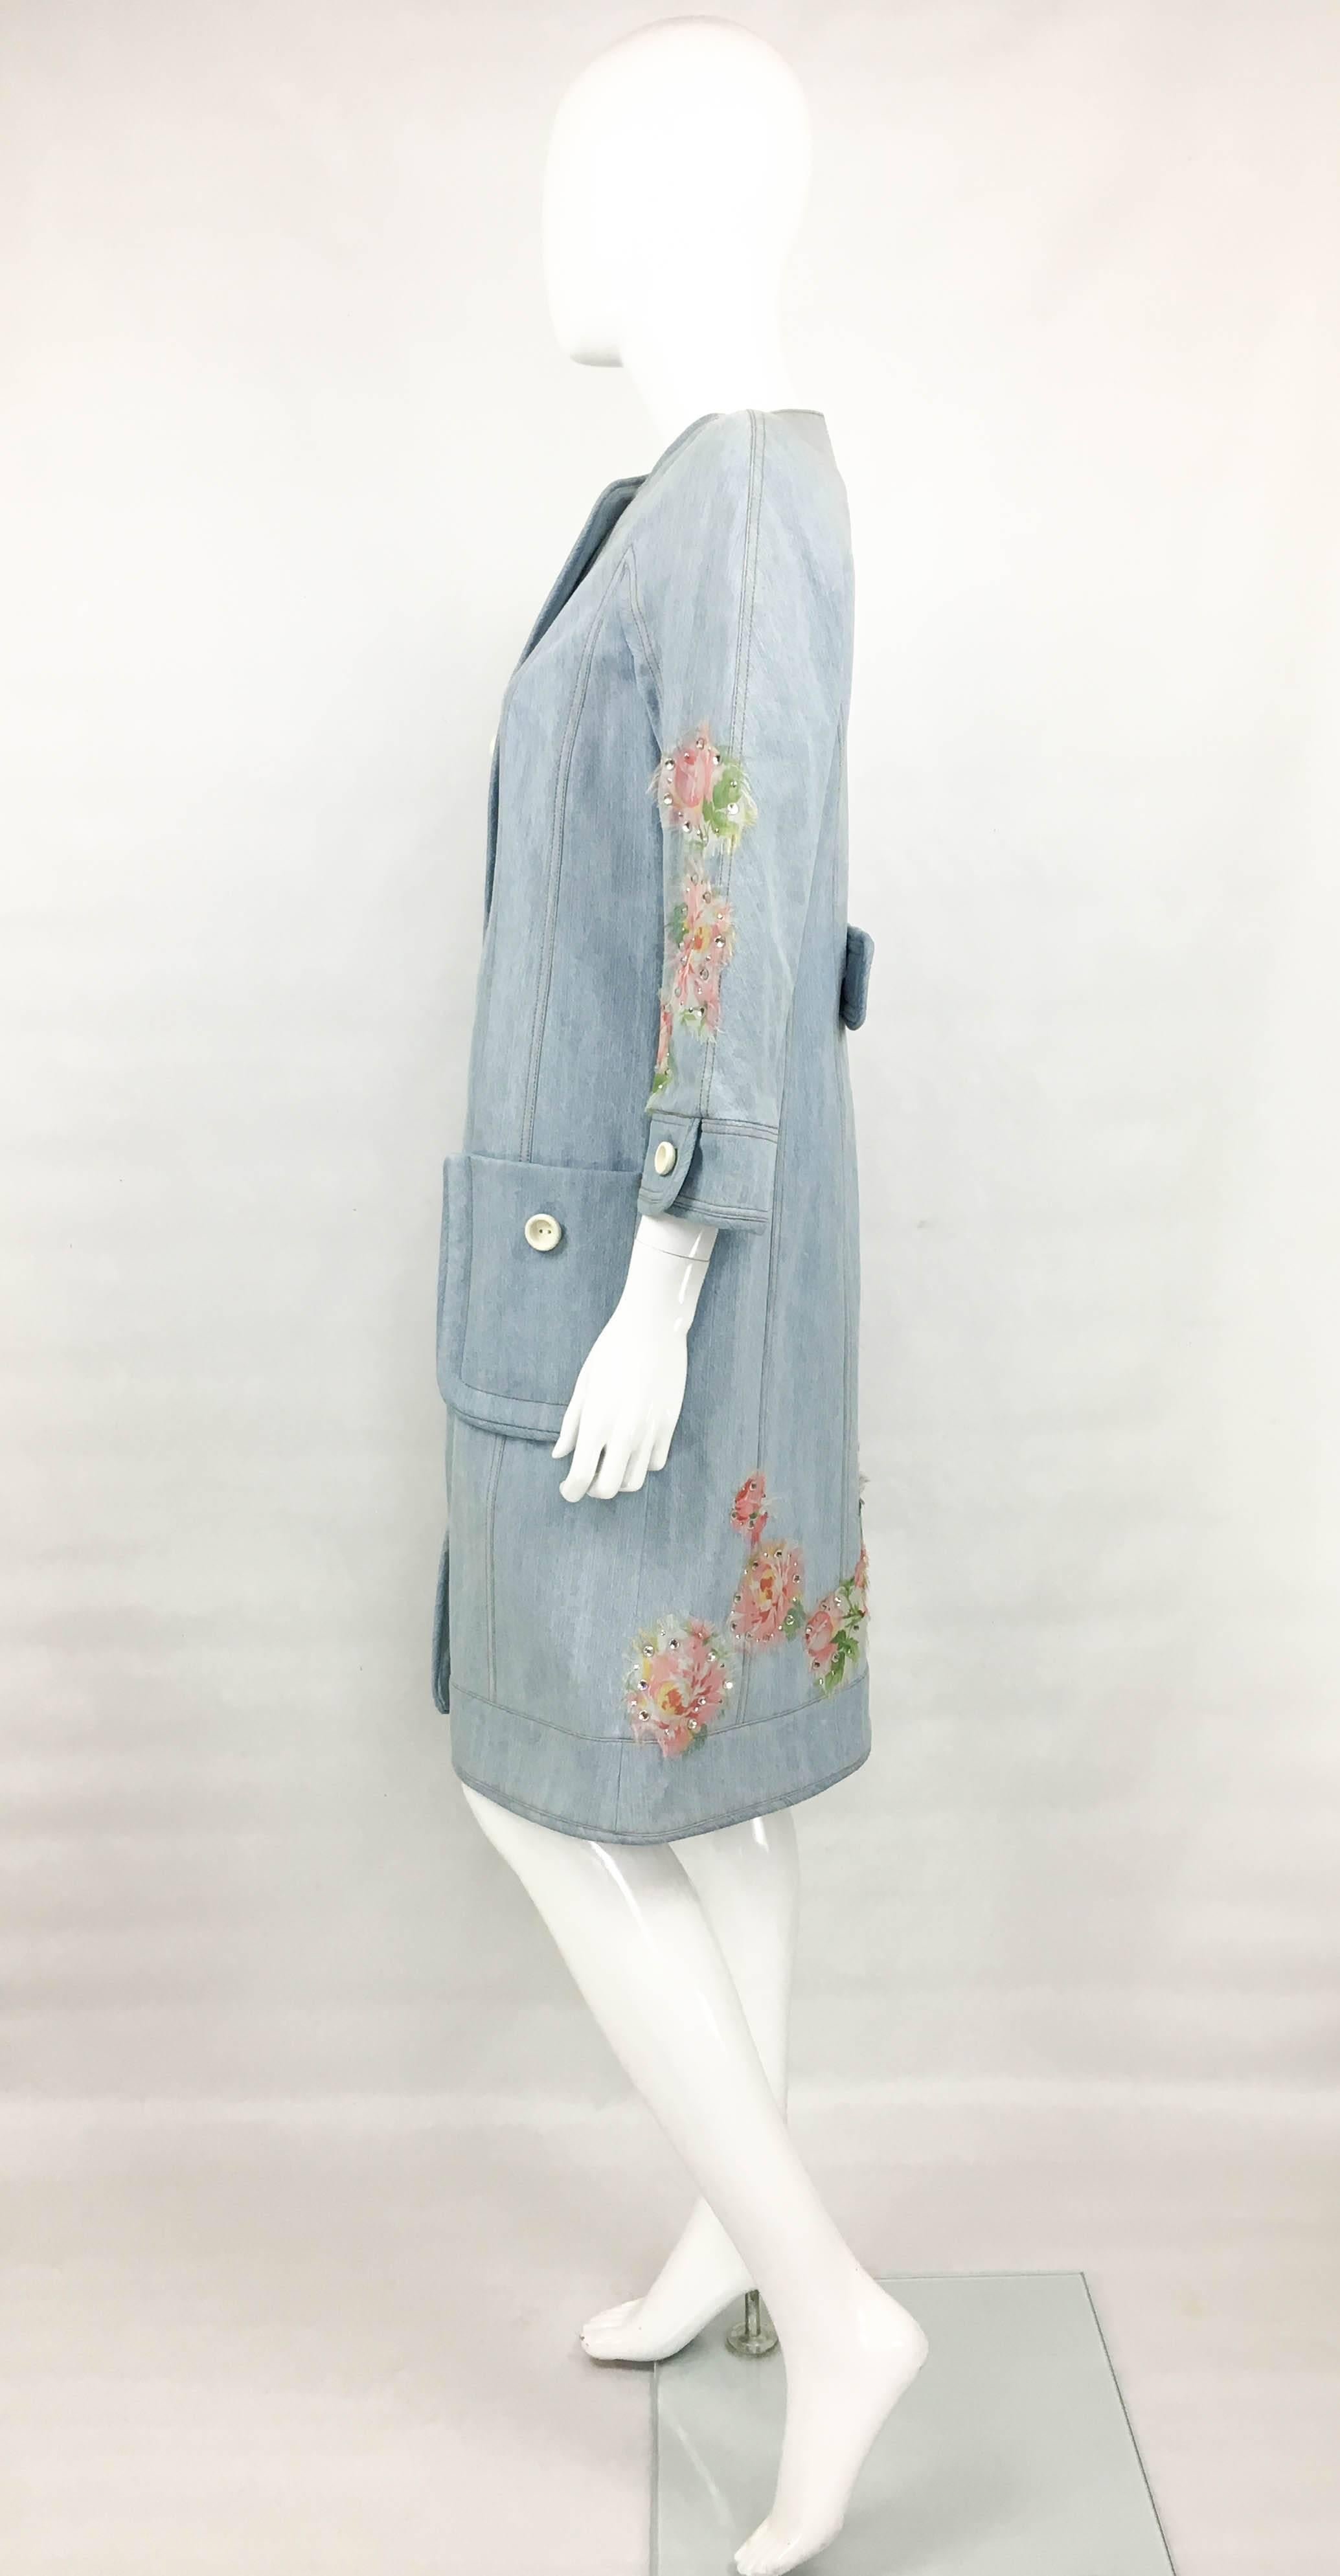 Women's Dior by Galliano 2005 Runway Look Denim Shirt Dress With Crystals and Appliqués For Sale